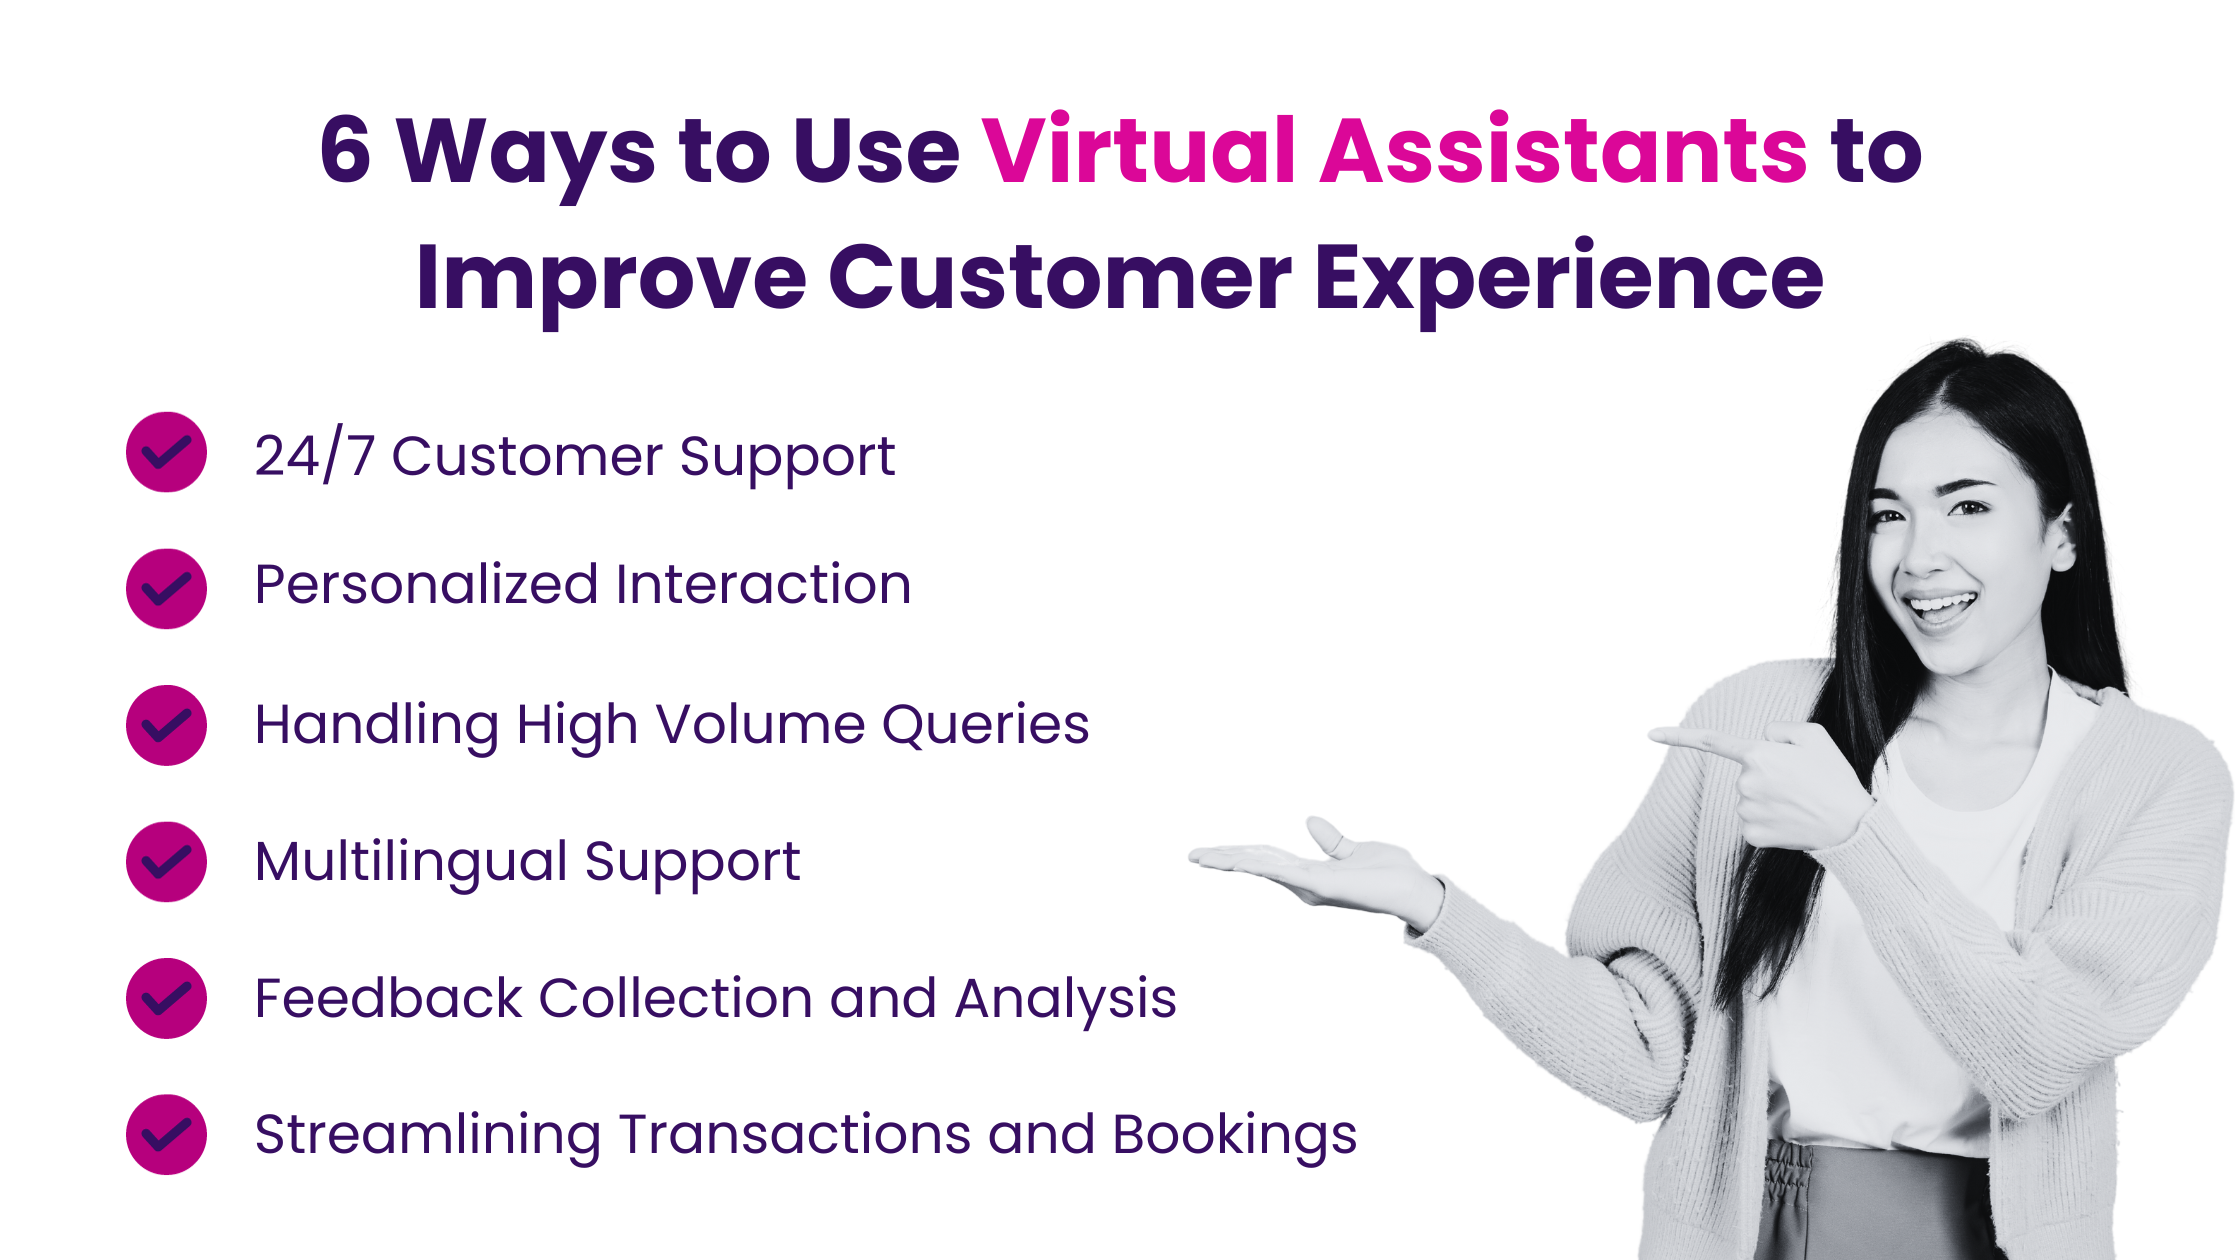 6 Ways to Use Virtual Assistants to Improve Customer Experience